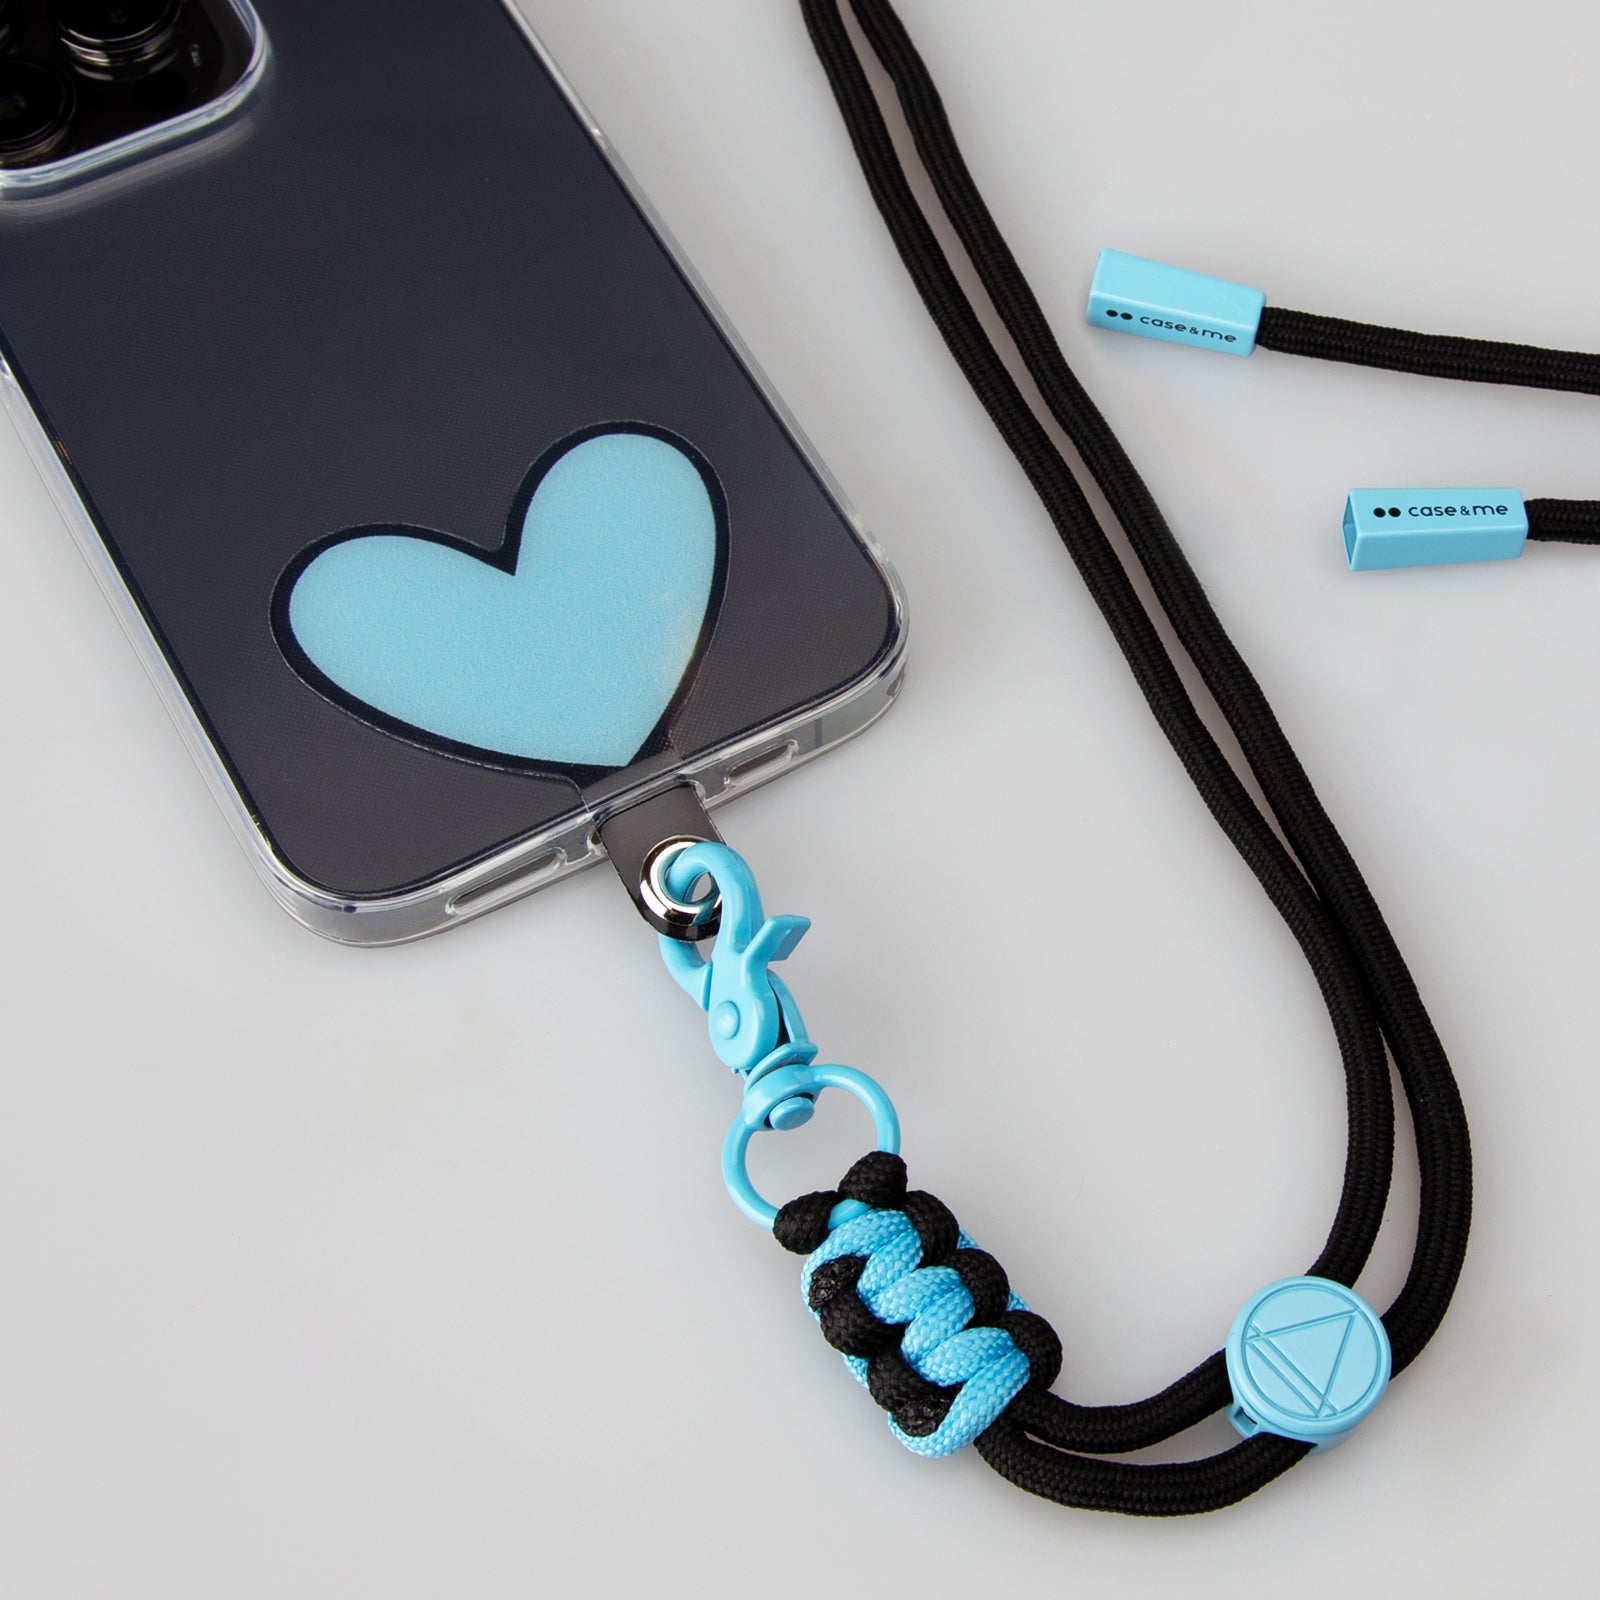 Phone lanyard also for iPhones